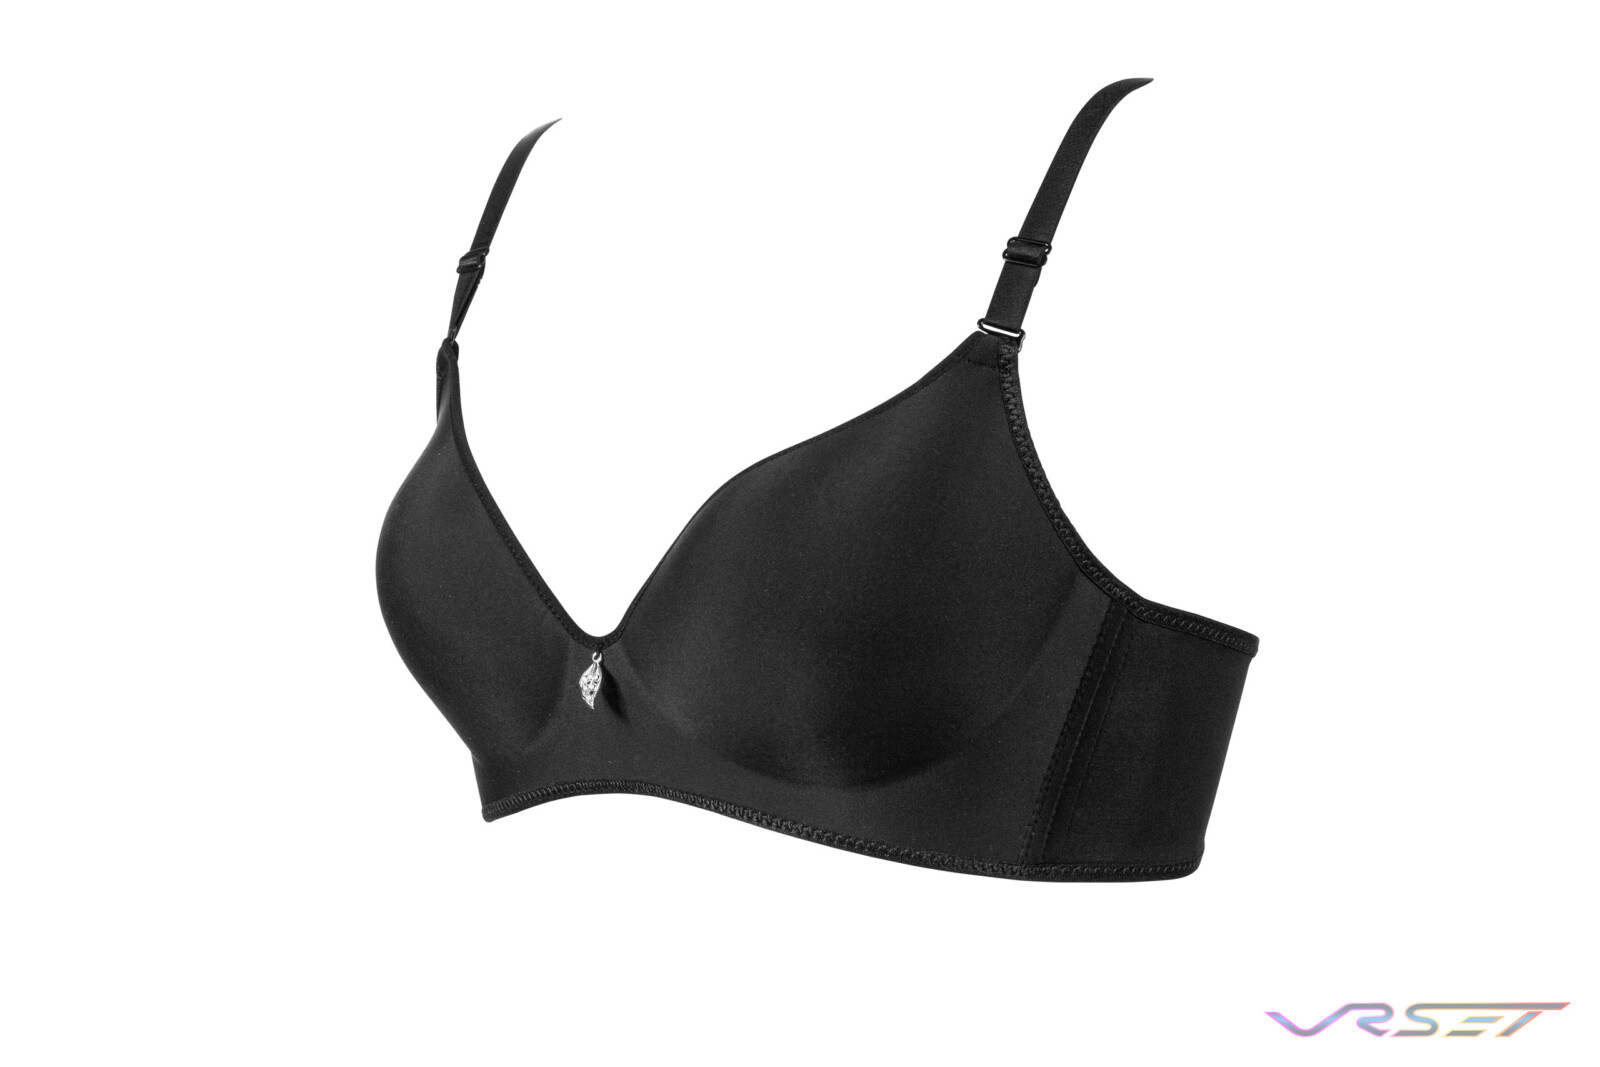 Amazon Shopify eCommerce Black Bra Side Lamour Intimates Lingerie Invisible Mannequin Photography Los Angeles